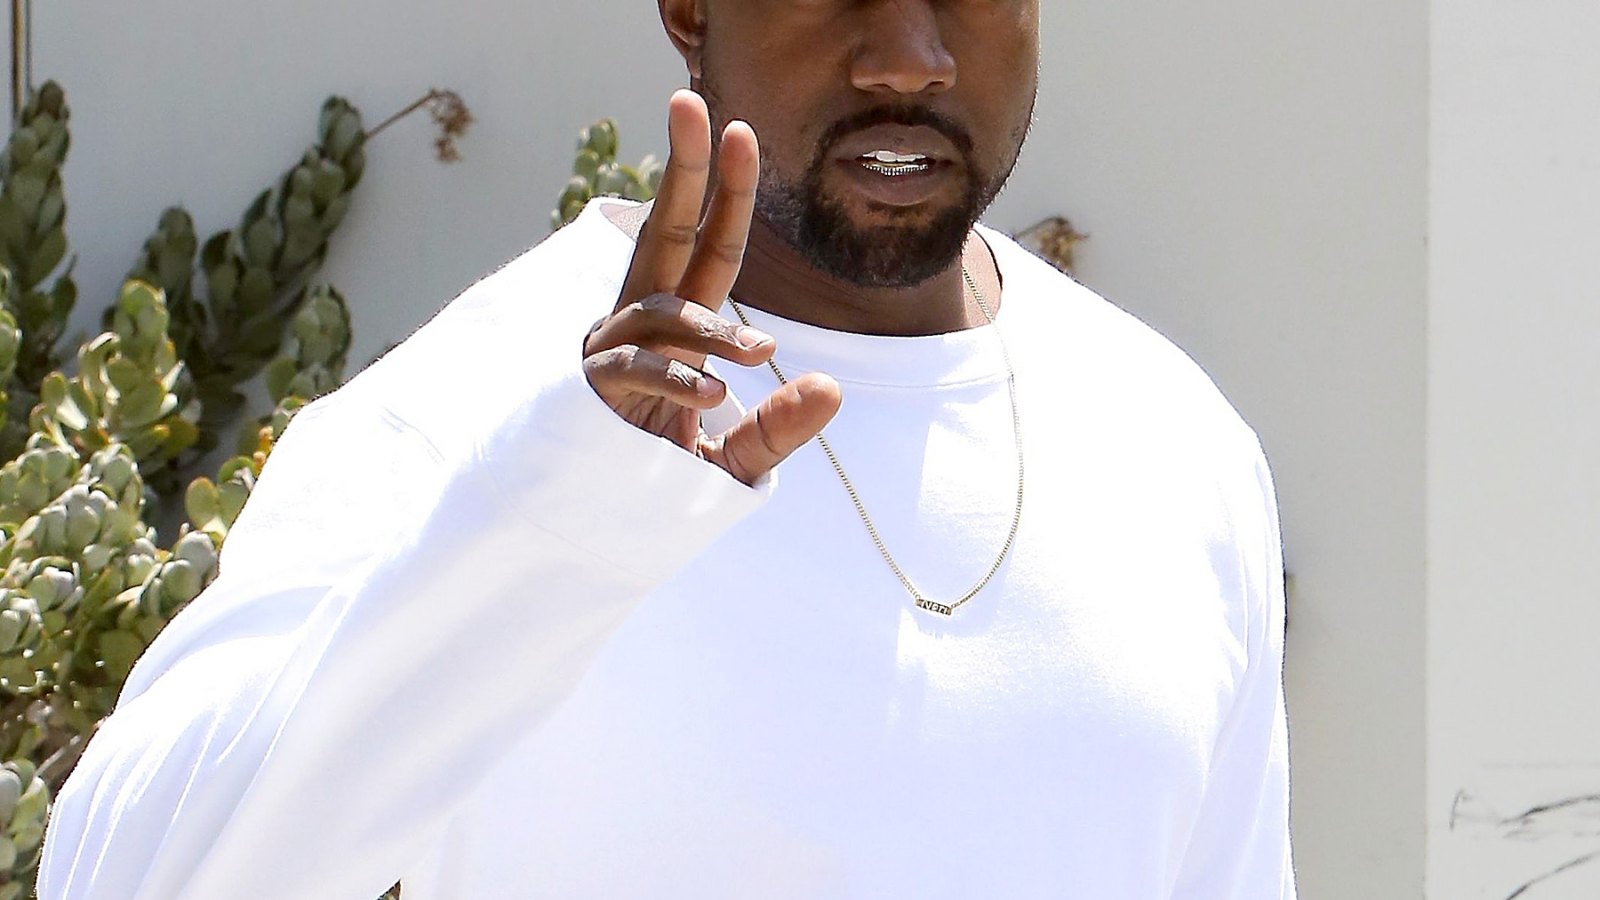 Kanye West wearing a Nori necklace on June 23, 2014